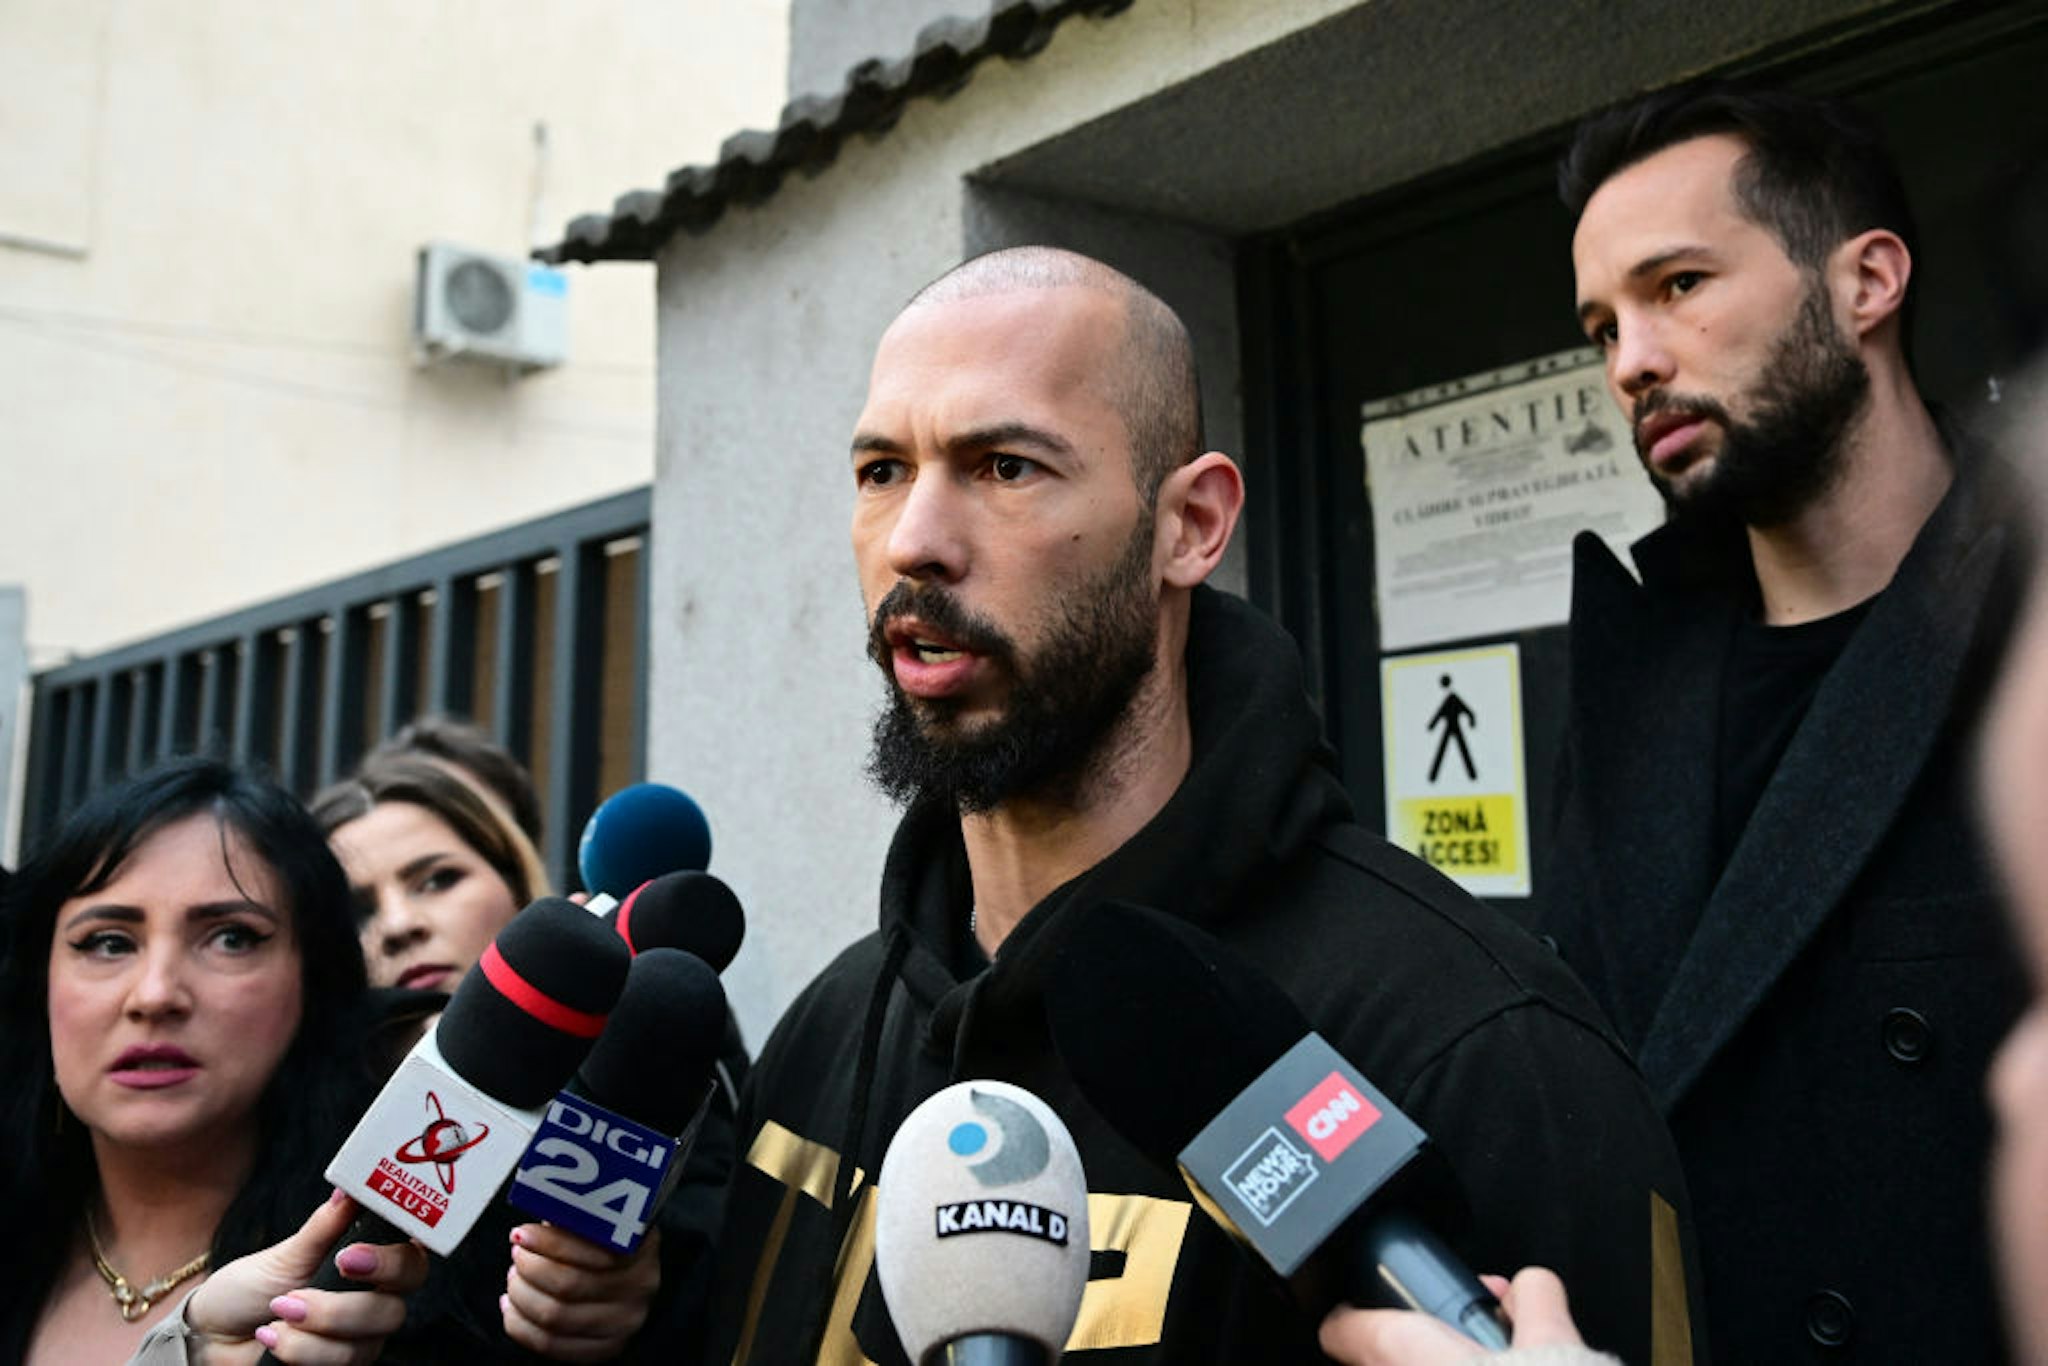 British-US former professional kickboxer and controversial influencer Andrew Tate (C) and his brother Tristan Tate (R) speak to journalists after having been released from detention in Bucharest, Romania on March 12, 2024, after they appeared in a court after Romanian police detained them over UK sex offence charges. A Bucharest court on March 12 granted a request to extradite controversial influencer Andrew Tate to the UK over sex offence charges, but only after the conclusion of legal proceedings in Romania in a separate case. The Bucharest appeals court ruling "orders the execution of the warrant of arrest issued on 19 January 2024" by the Westminster Magistrates' Court, but postpones extradition "until the final resolution of the case" in Romania, which could take years. (Photo by Daniel MIHAILESCU / AFP) (Photo by DANIEL MIHAILESCU/AFP via Getty Images)